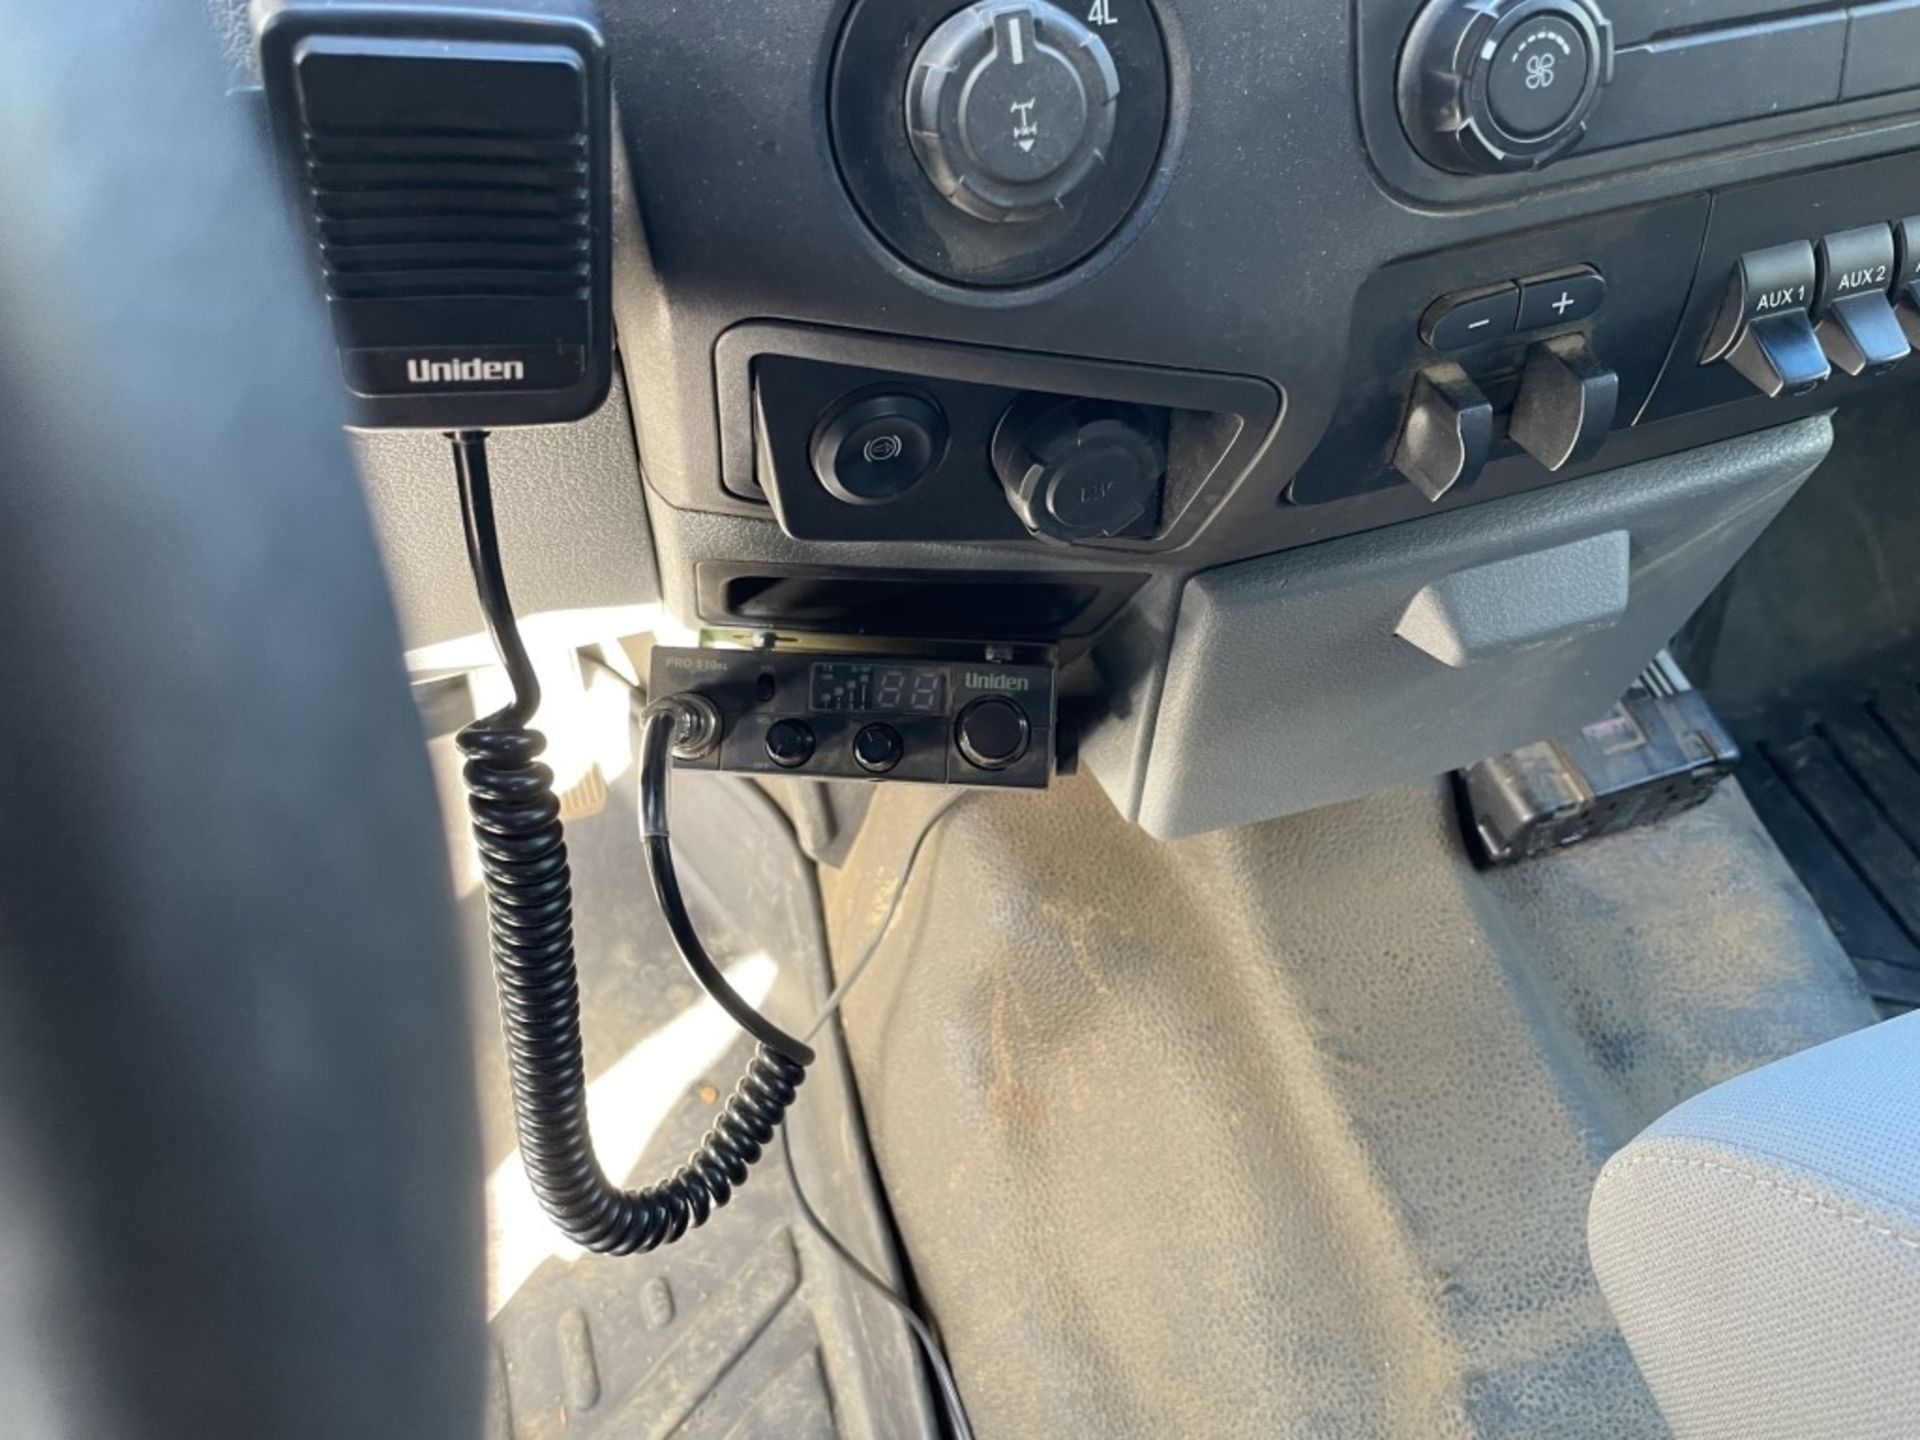 2015 Ford F350 XL SD 4x4 Crew Cab Pickup - Image 20 of 24